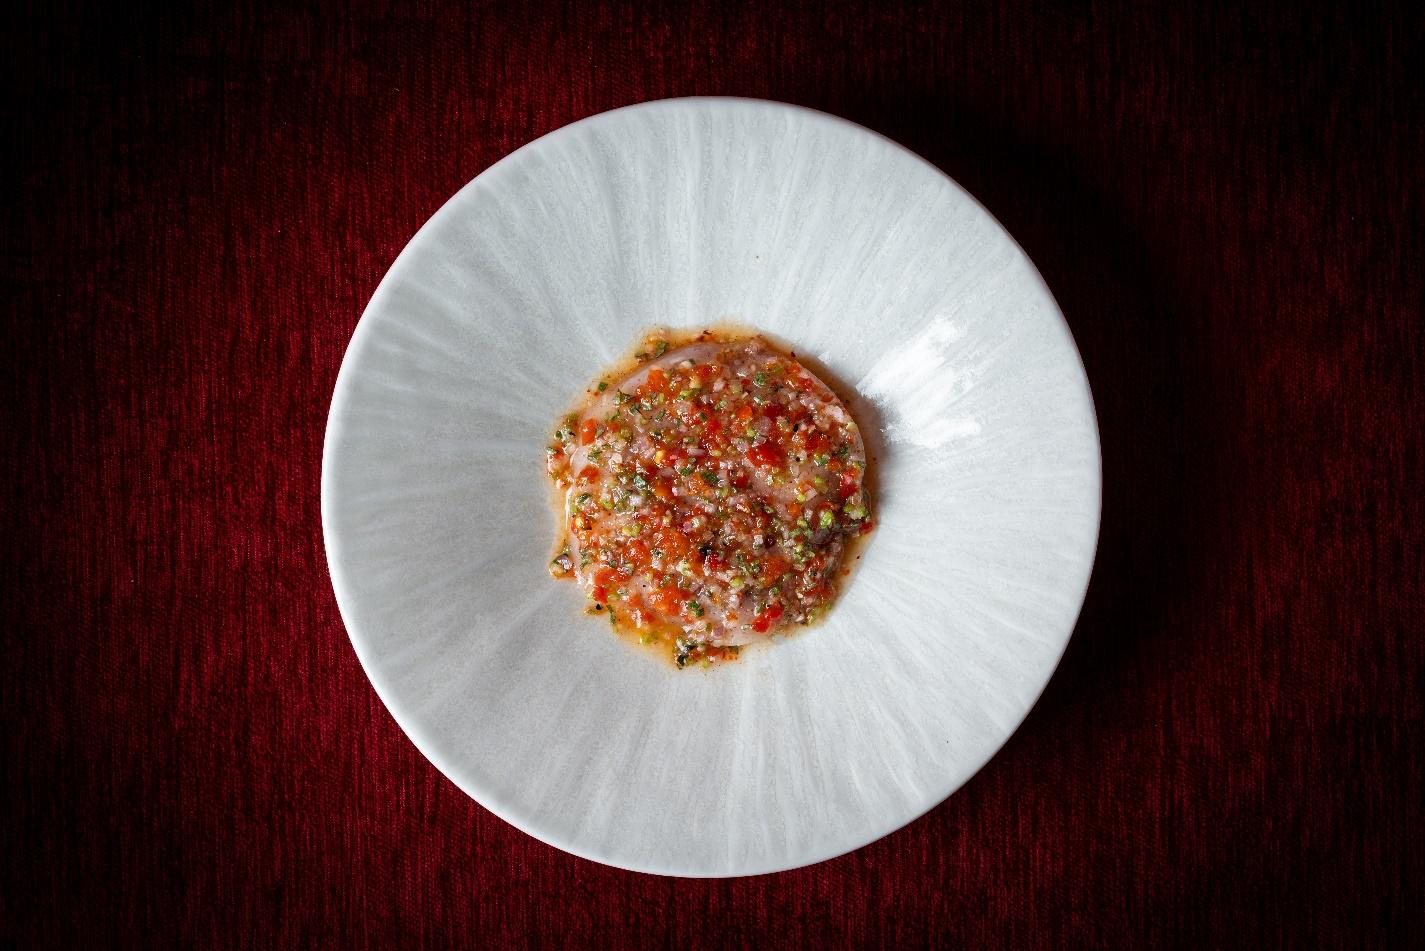 A plate of food on a red surface

Description automatically generated